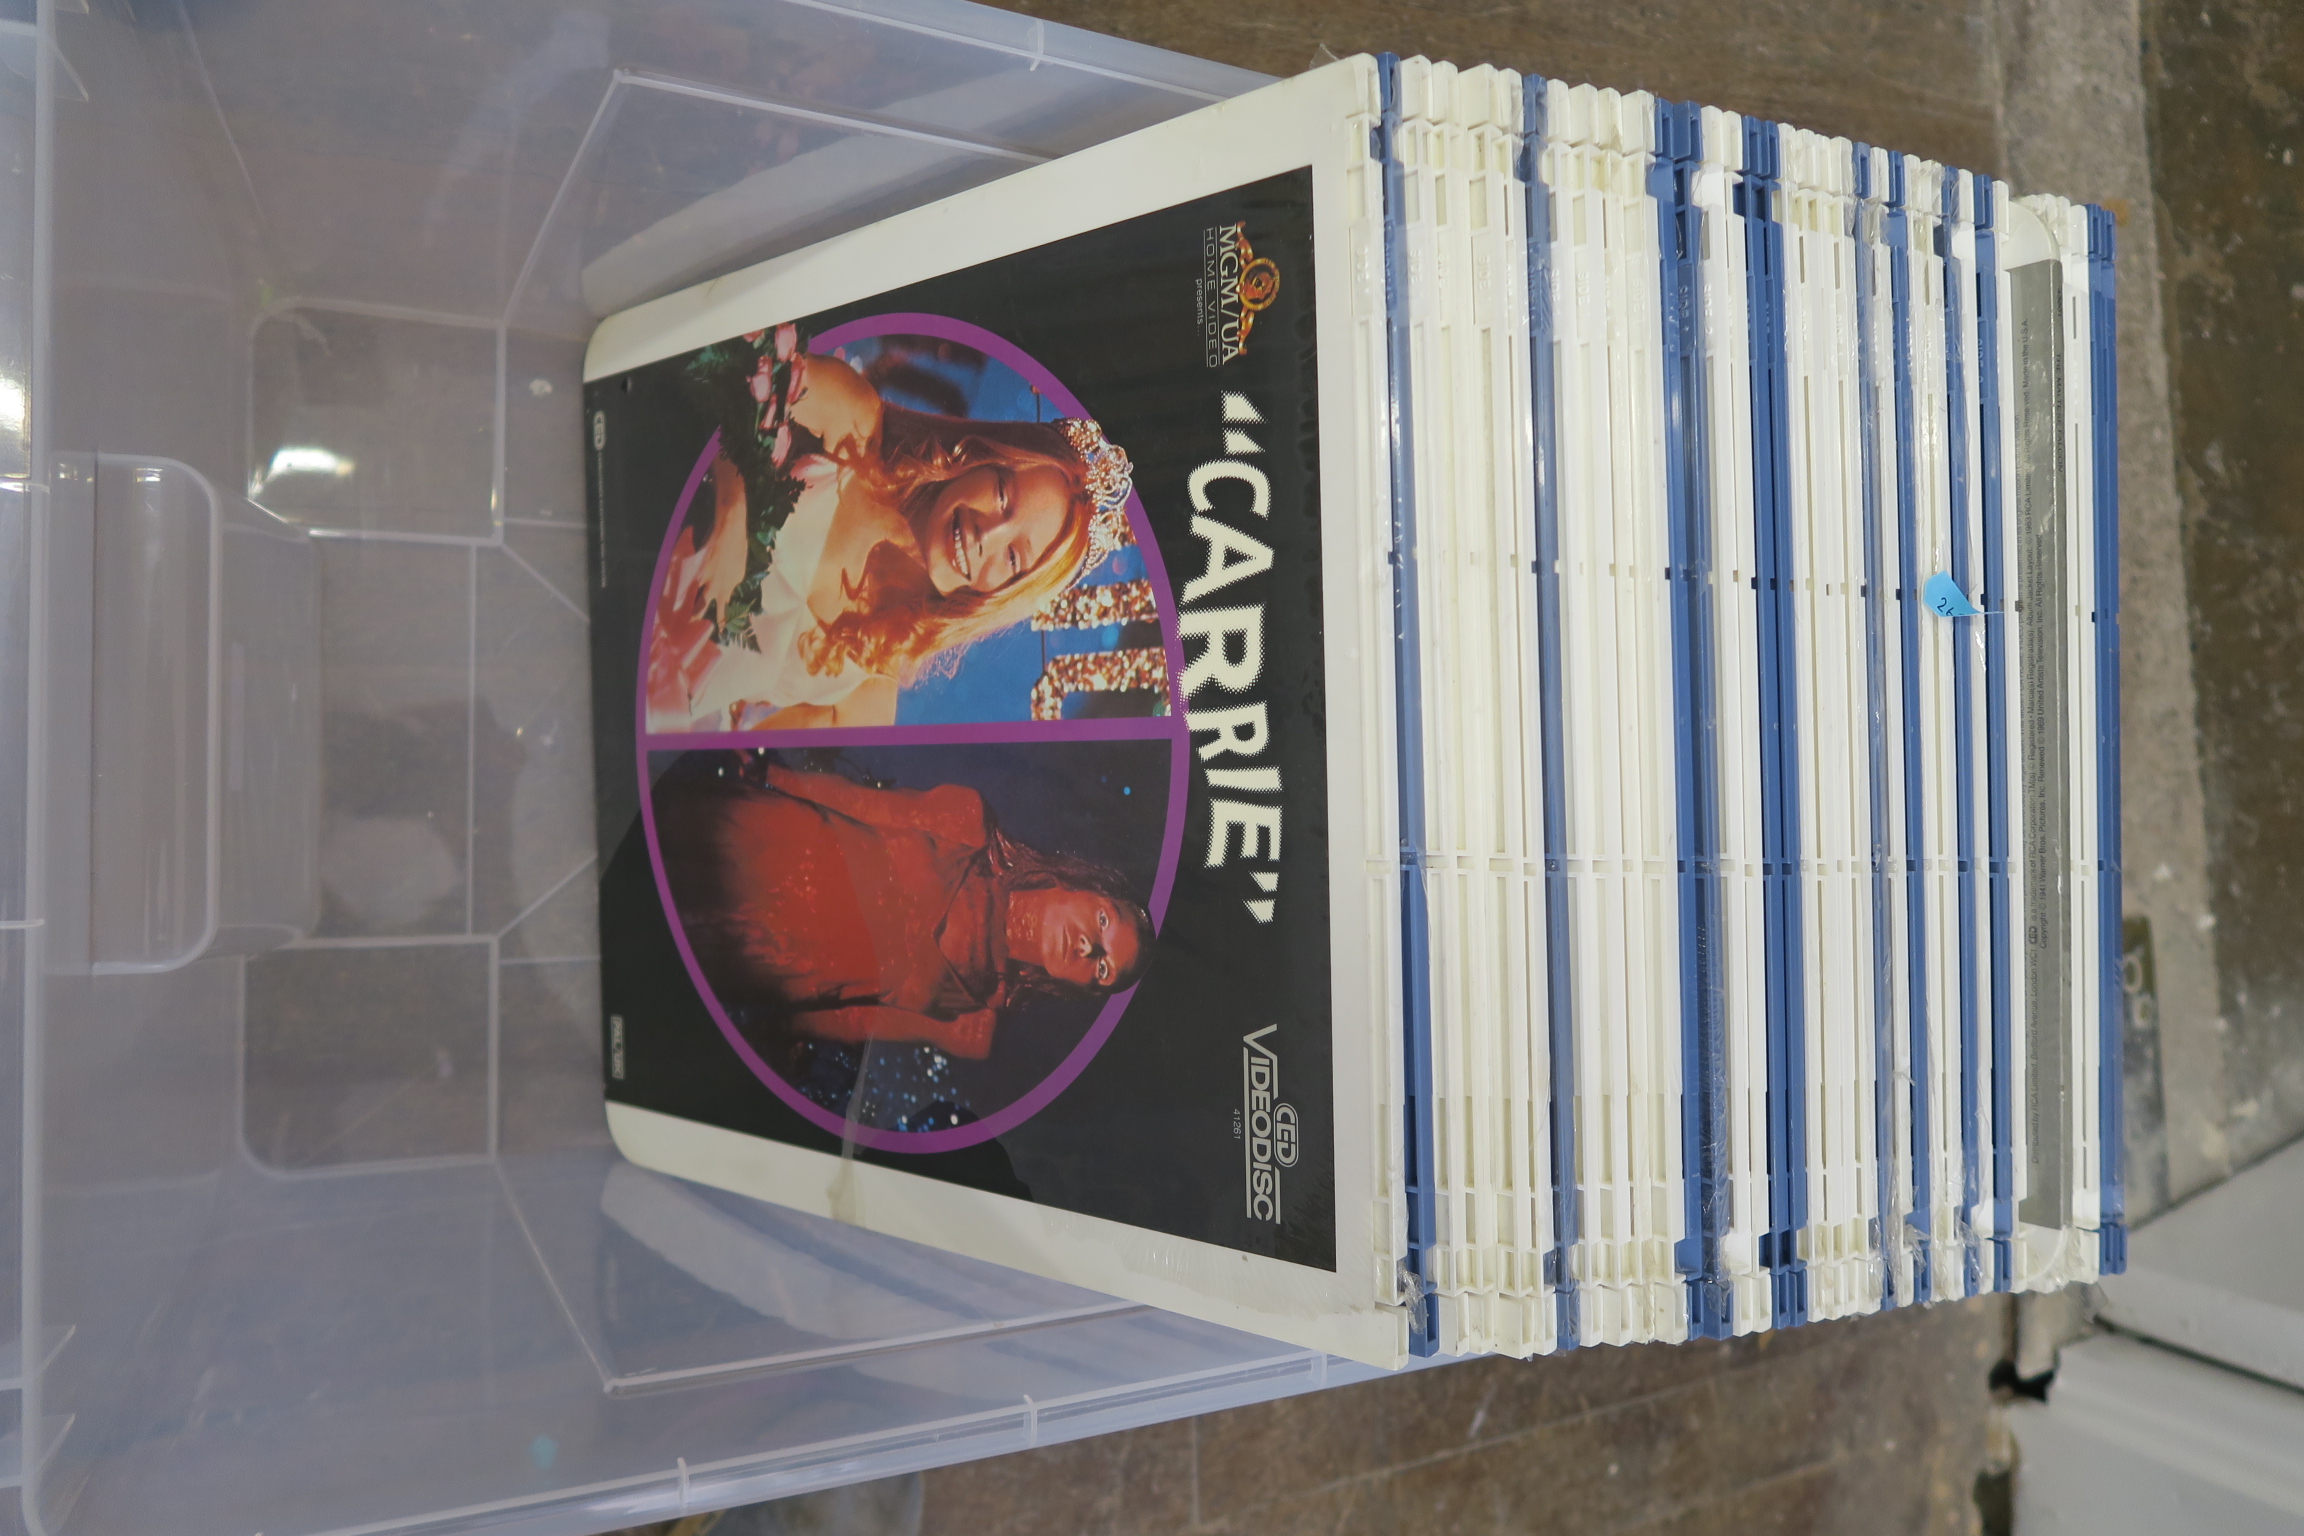 36 Laser video discs some sealed titles inc An American Werewolf in London, The boat, Rollerball, - Image 4 of 4